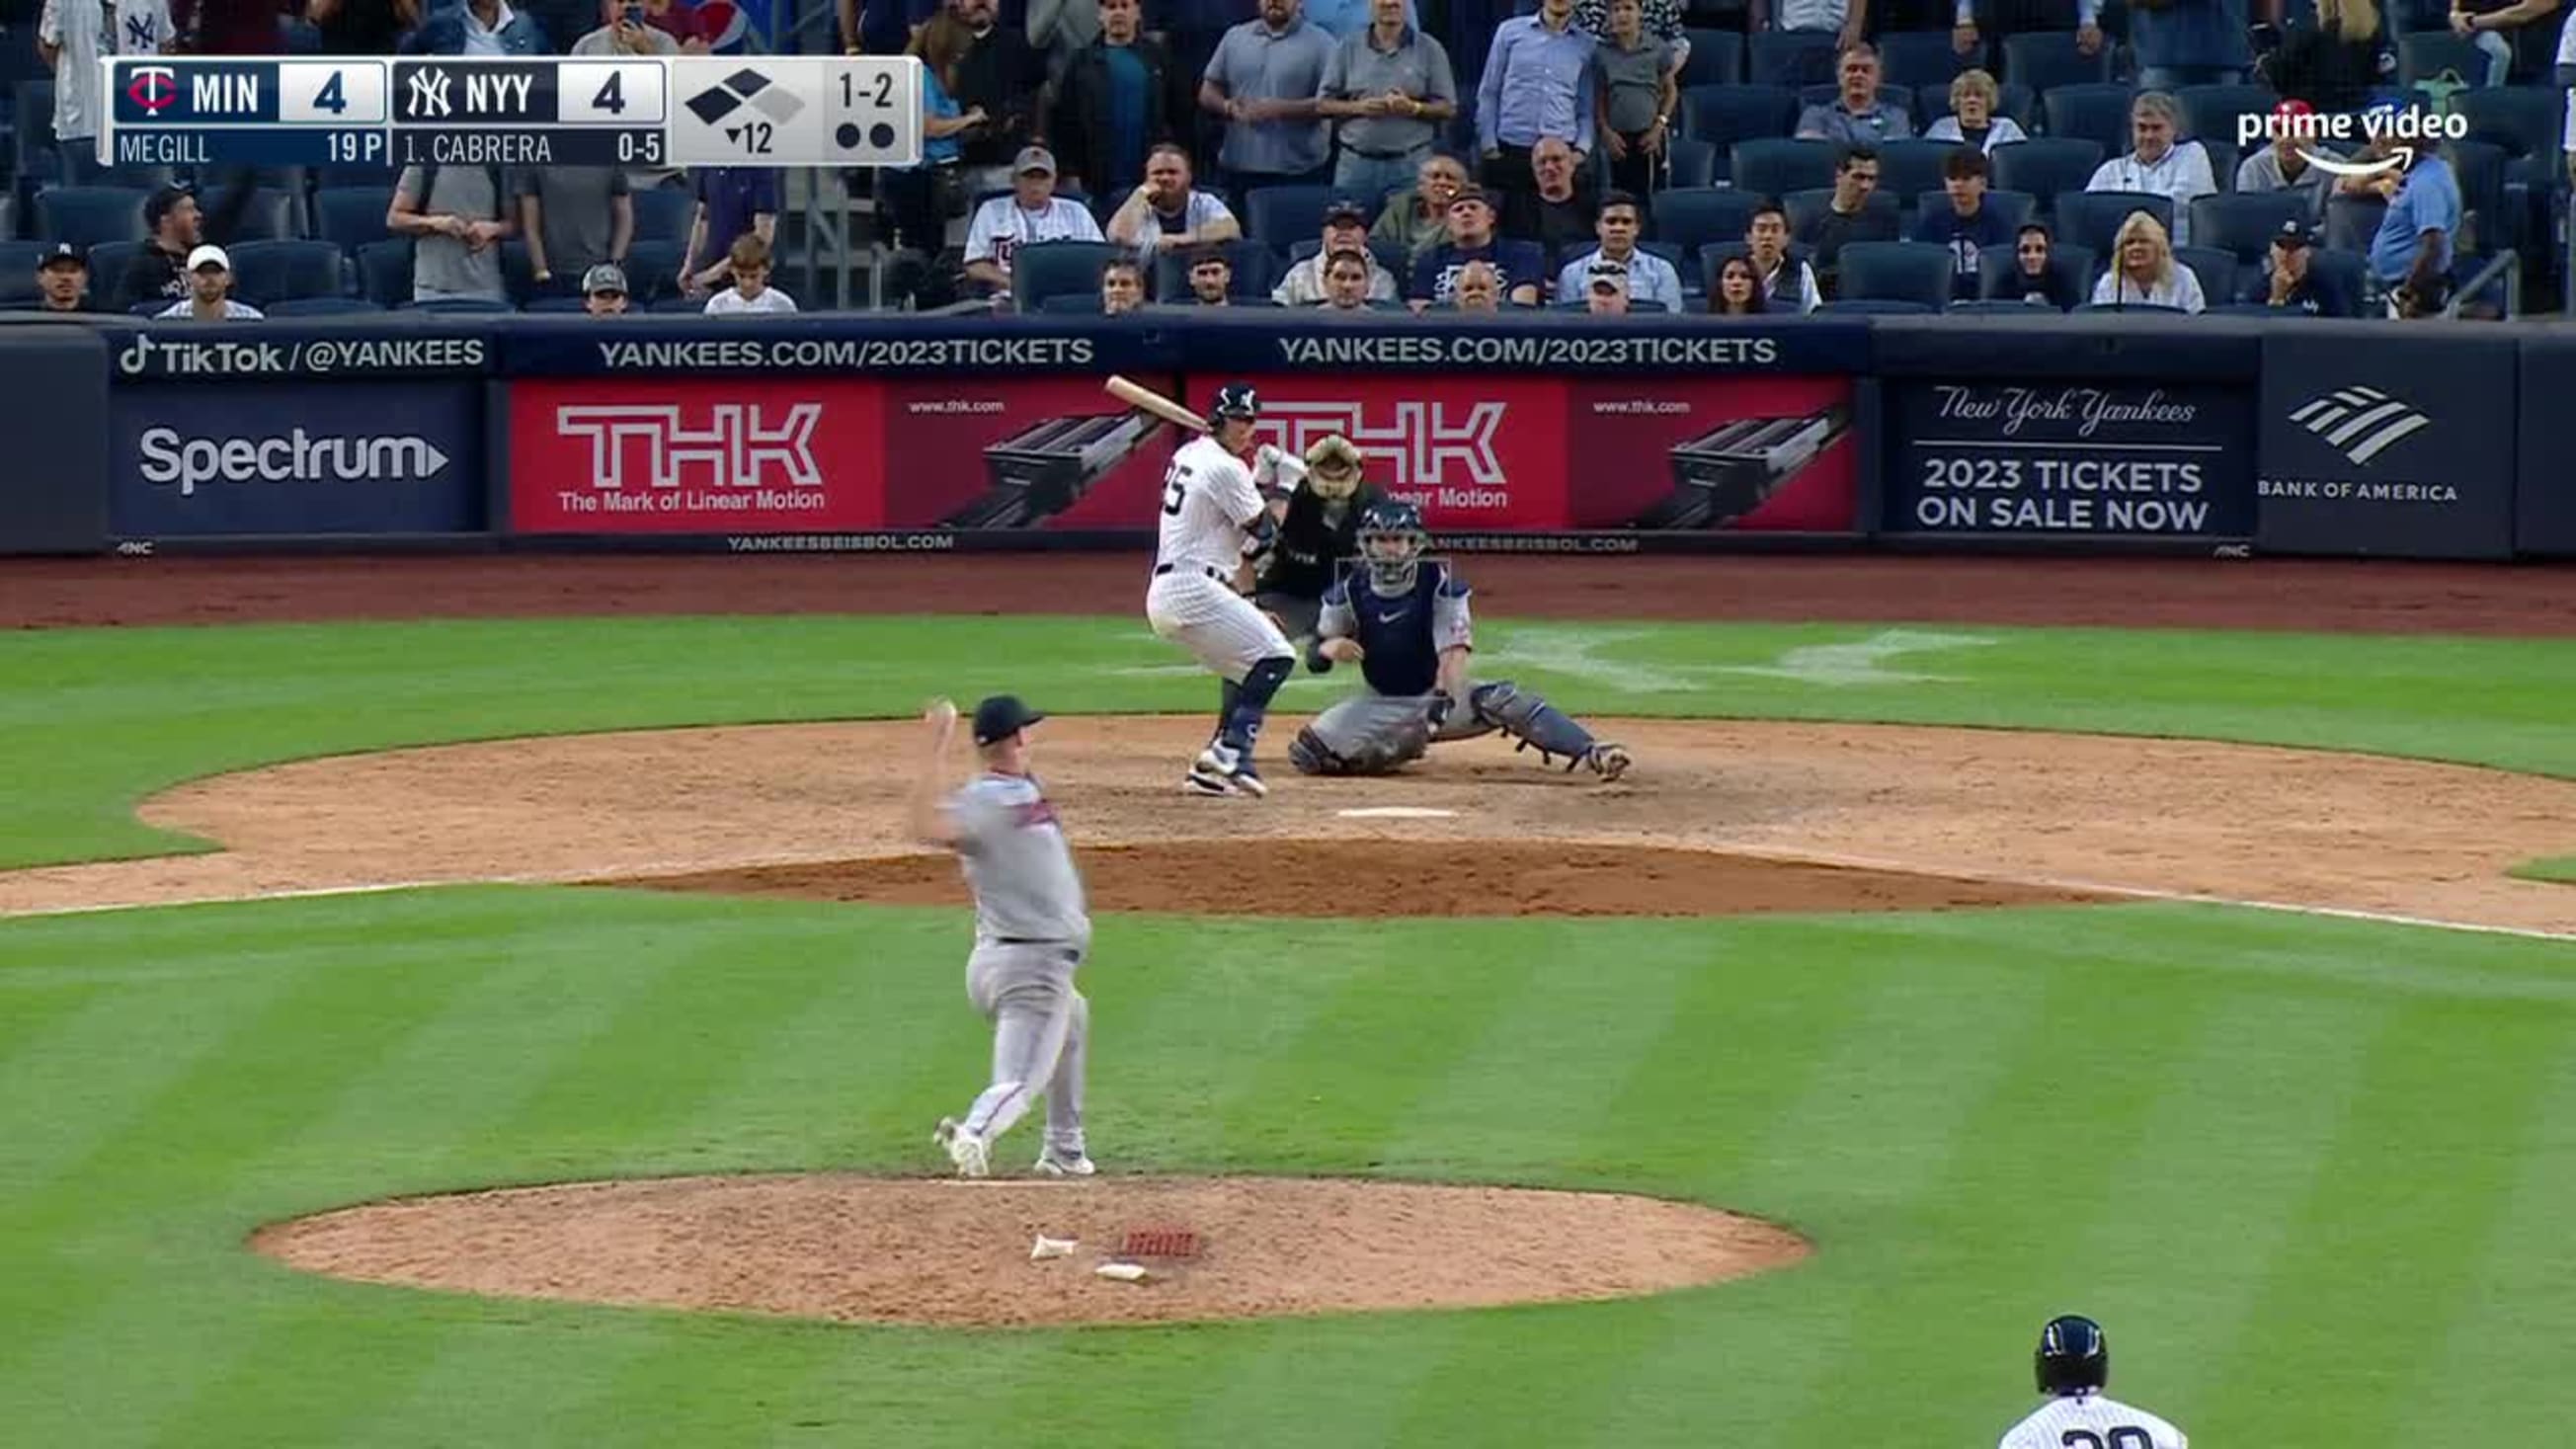 Oswaldo Cabrera hoses down Baty for the final out of the 5th : r/baseball